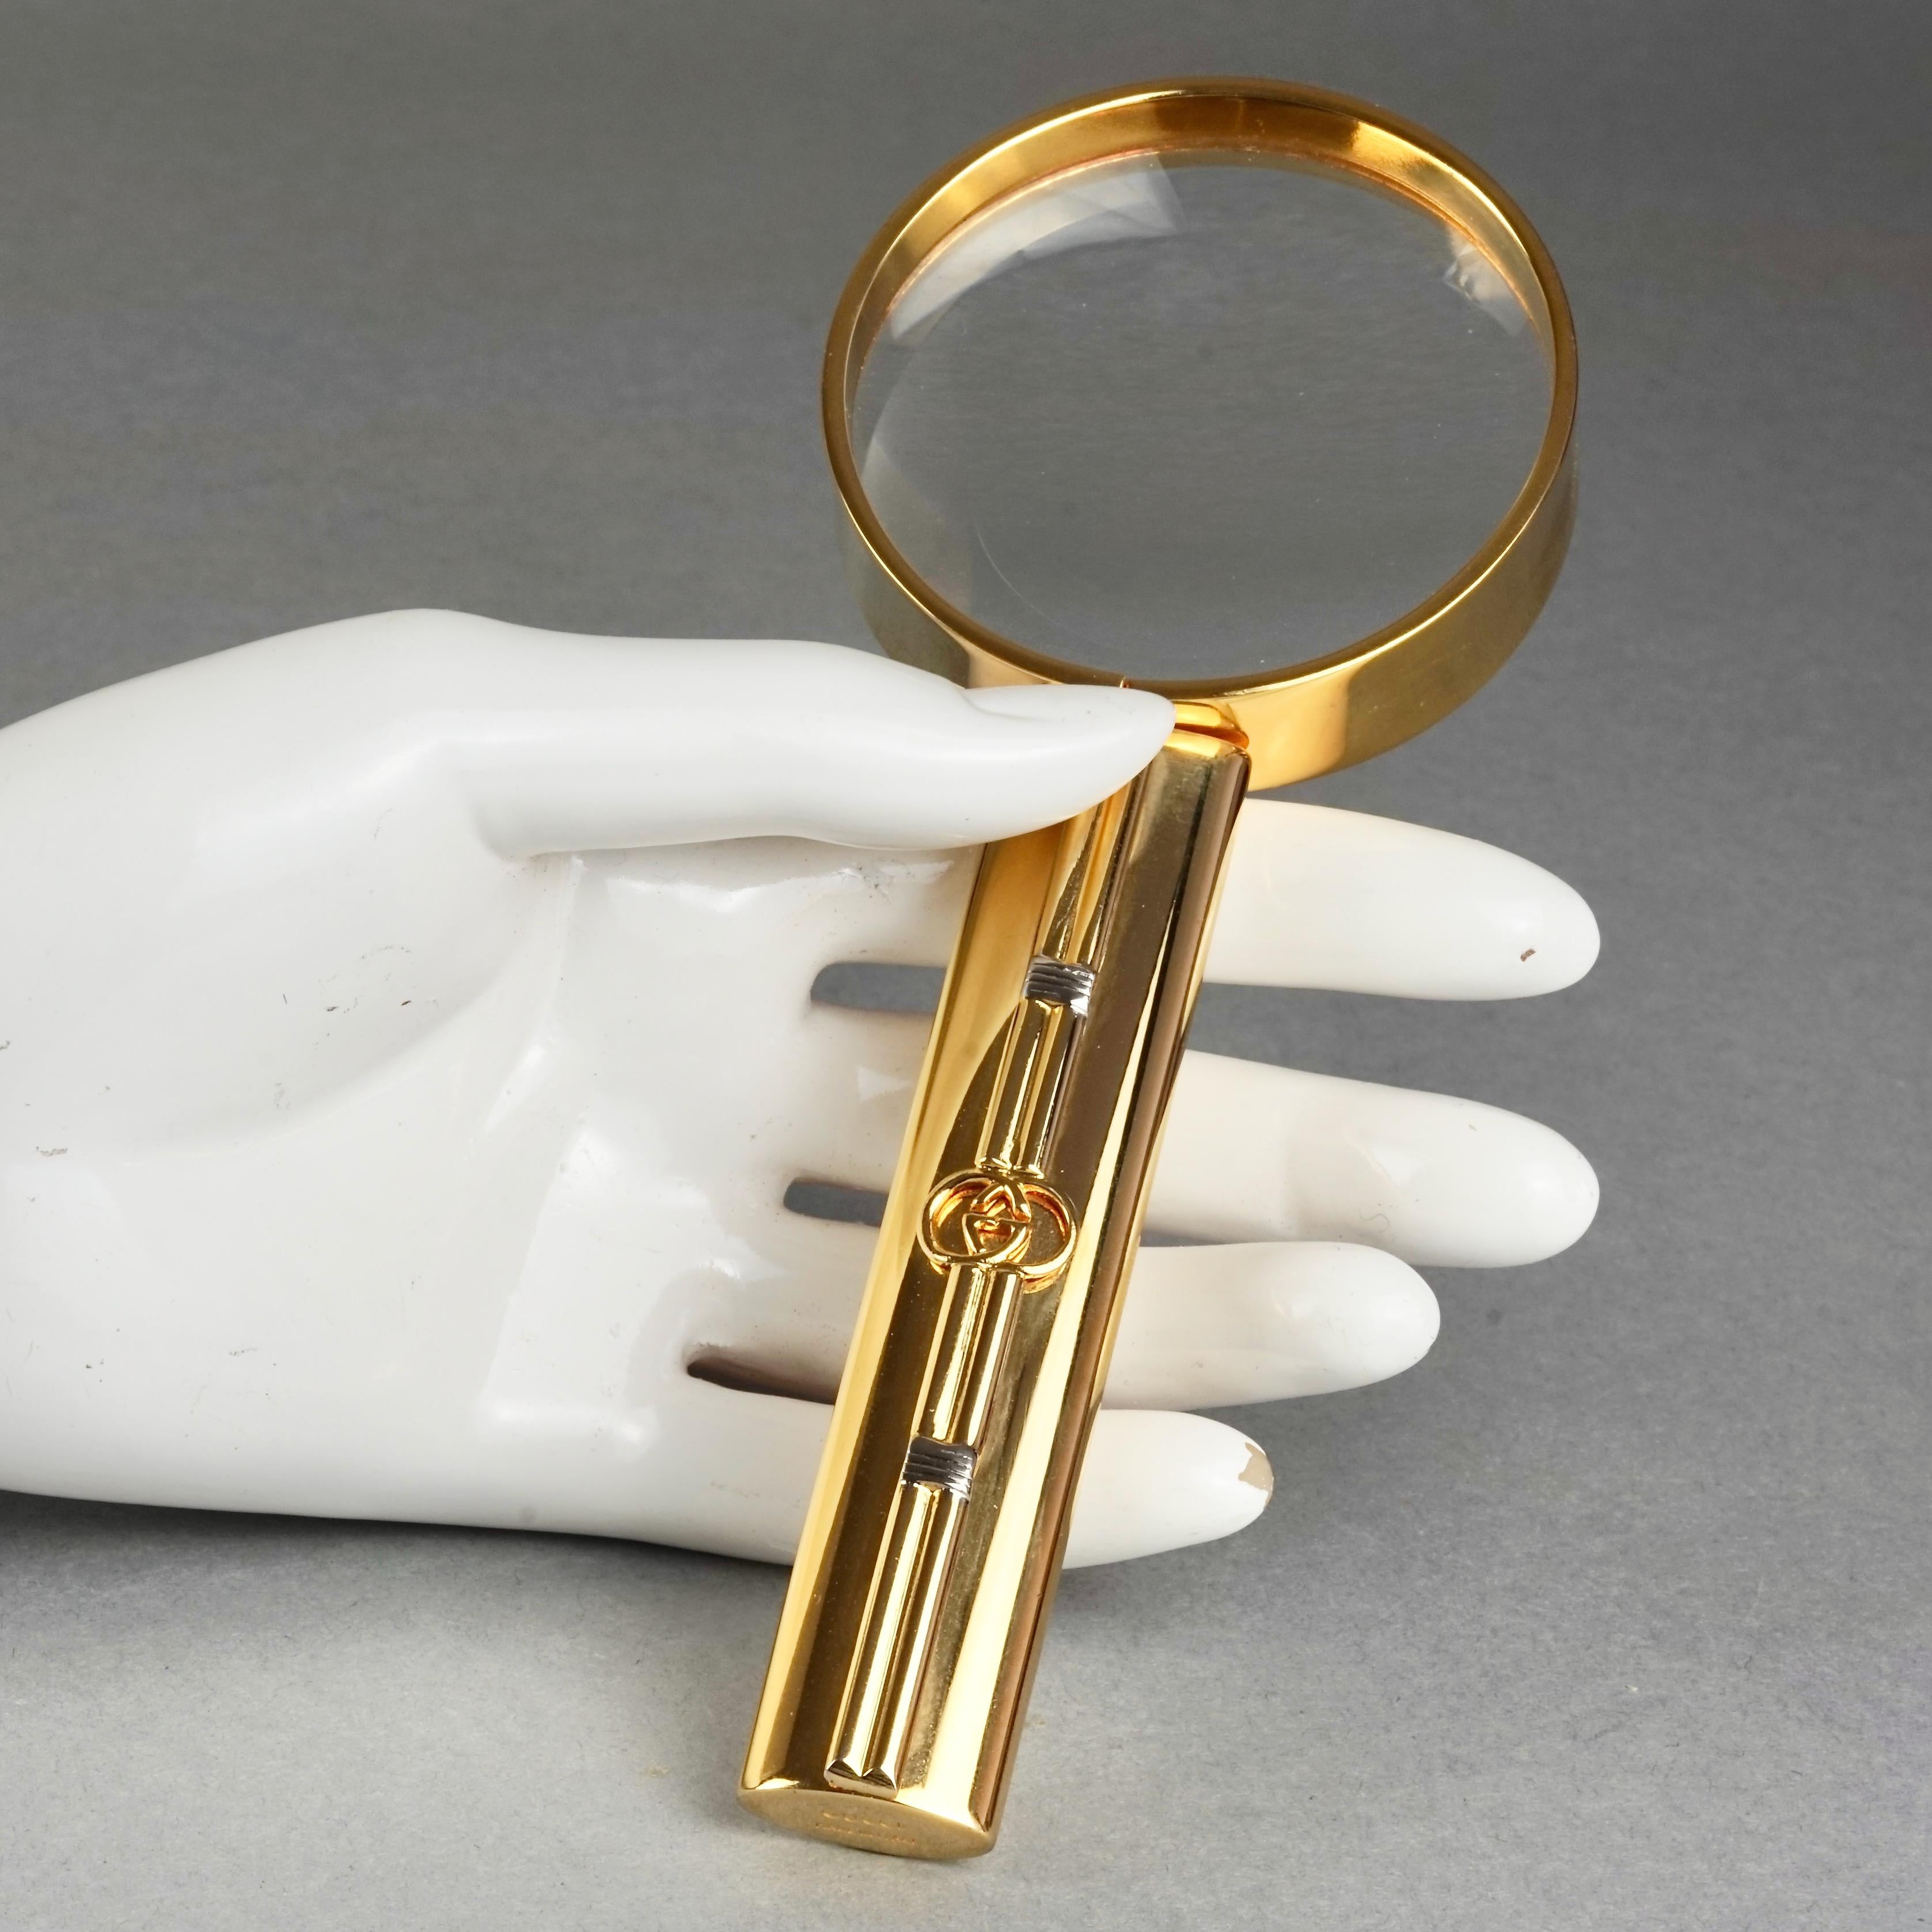 Vintage RARE GUCCI Gold Plated Magnifying Glass 

Measurements:
Diameter: 2.44 inches (6.2 cm)
Thickness Magnifying Glass: 0.59 inch (1.5 cm)
Length: 6.29 inches (16 cm)

Features:
- 100% Authentic GUCCI.
- Gold plated magnifying glass .
- Signed